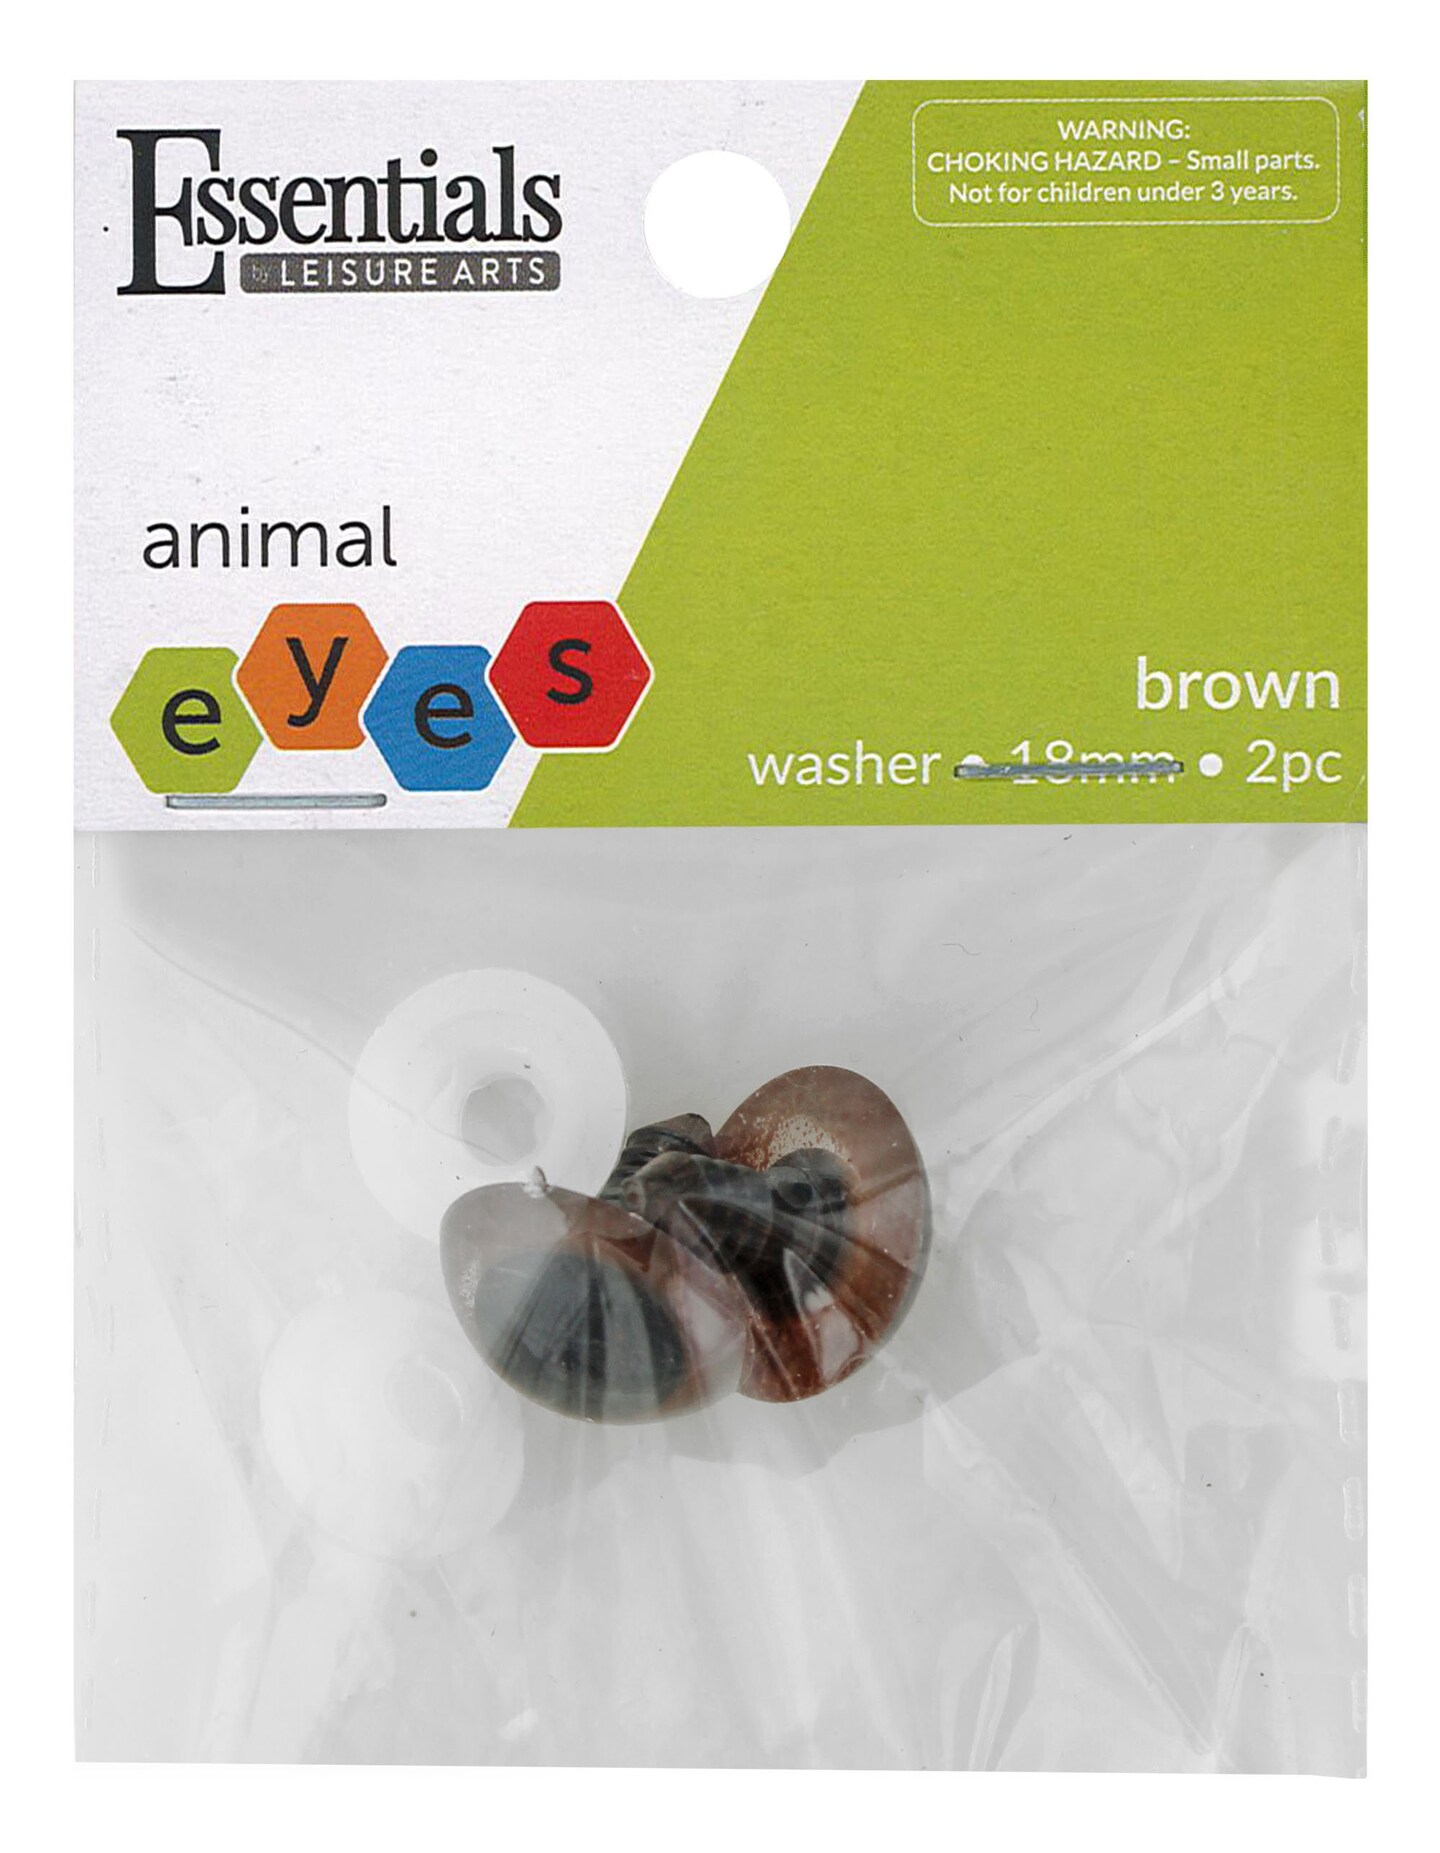 Essentials by Leisure Arts Eyes Solid with Washer Brown, 18mm, 2 pieces Googly Eyes, Google Eyes for Crafts, Big Googly Eyes for Crafts, Wiggle Eyes, Craft Eyes